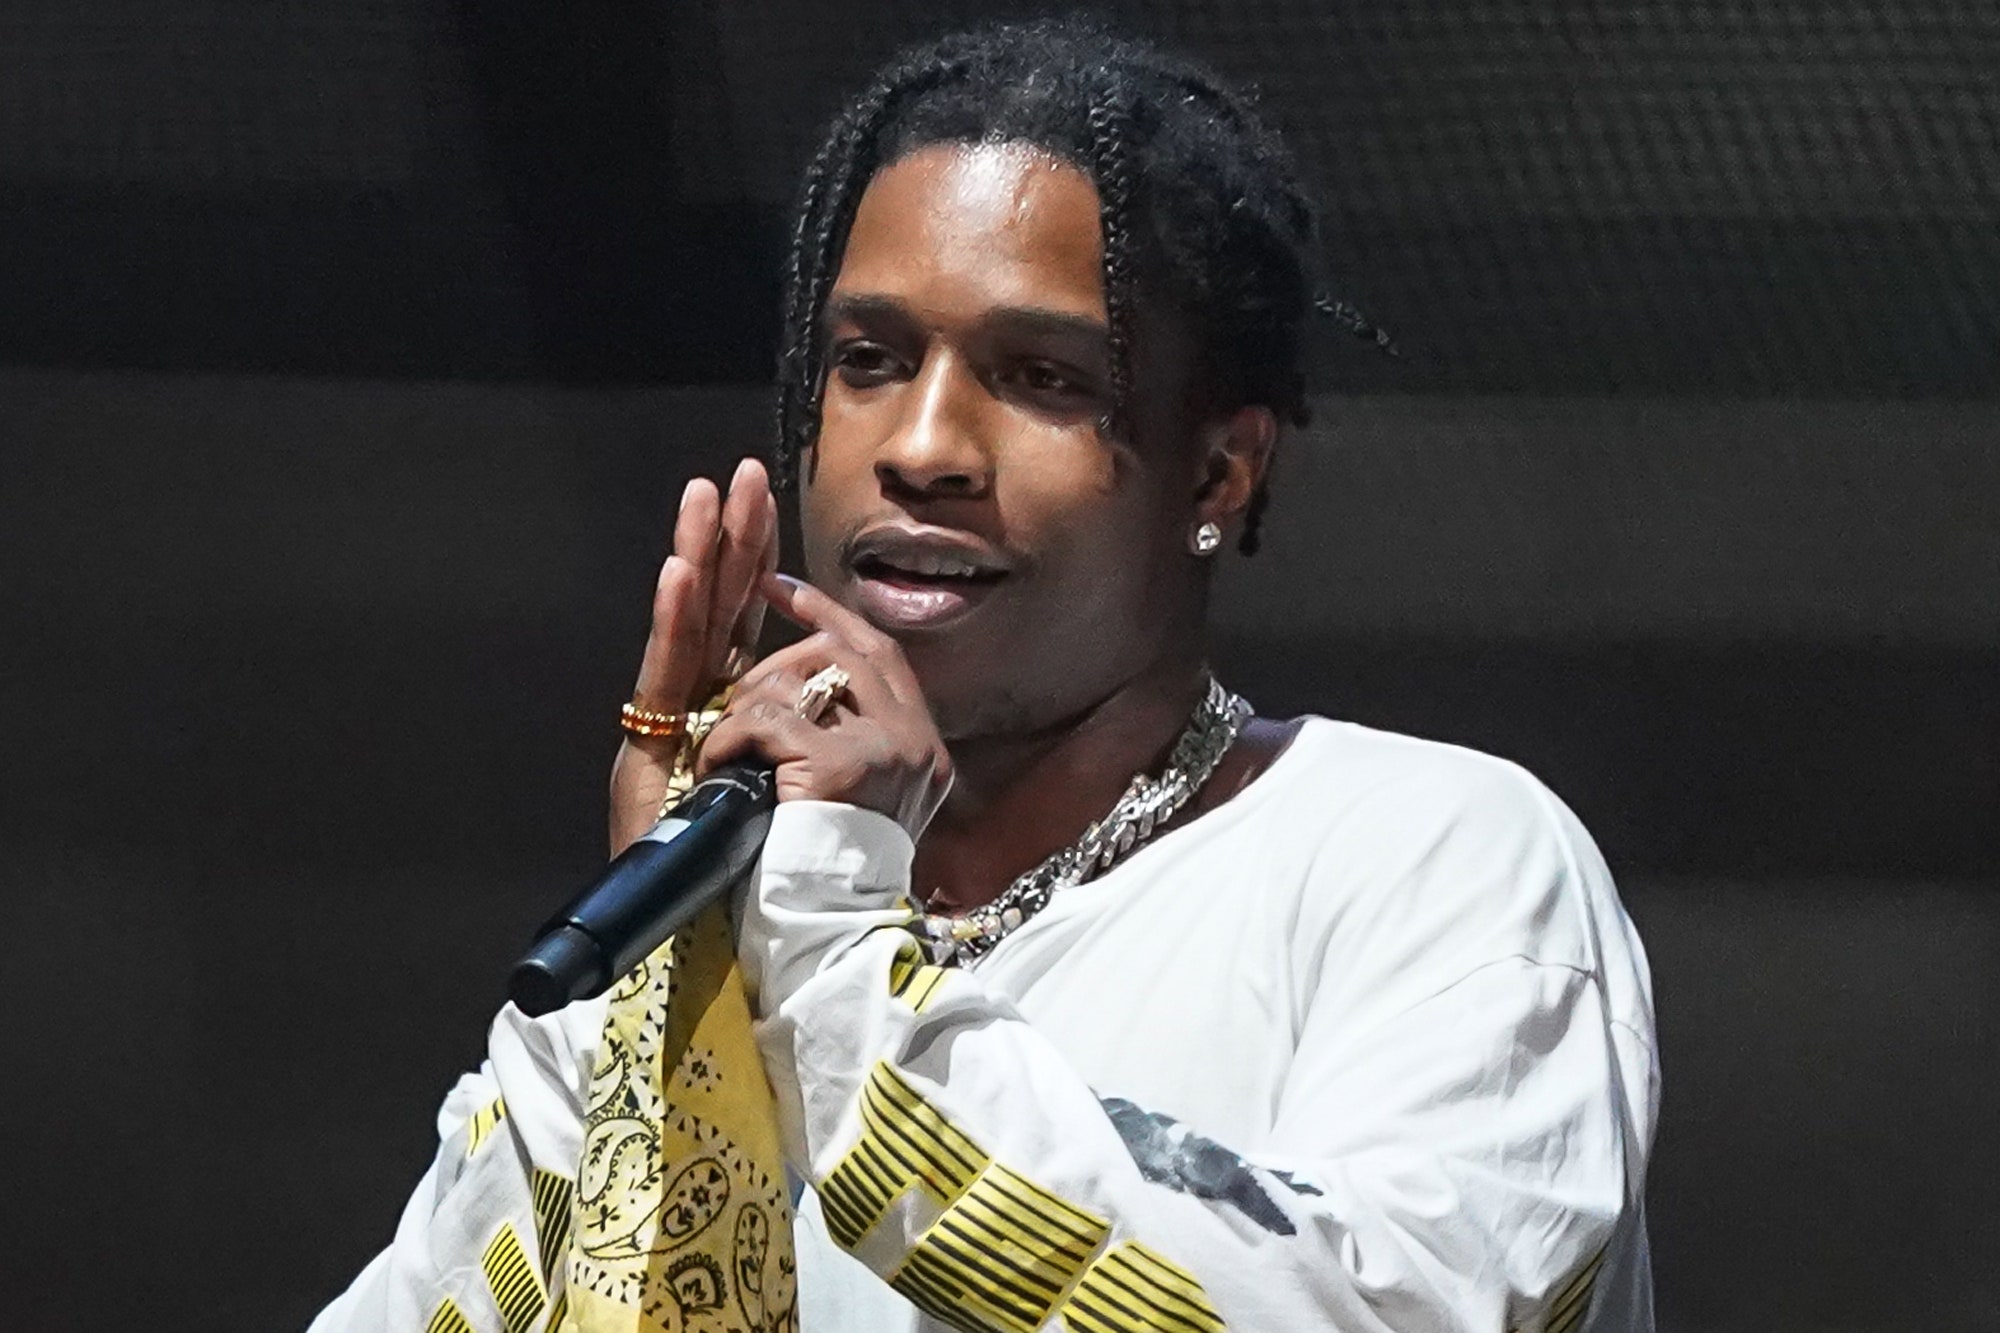 Musical Career and Achievements - ASAP Rocky Singer